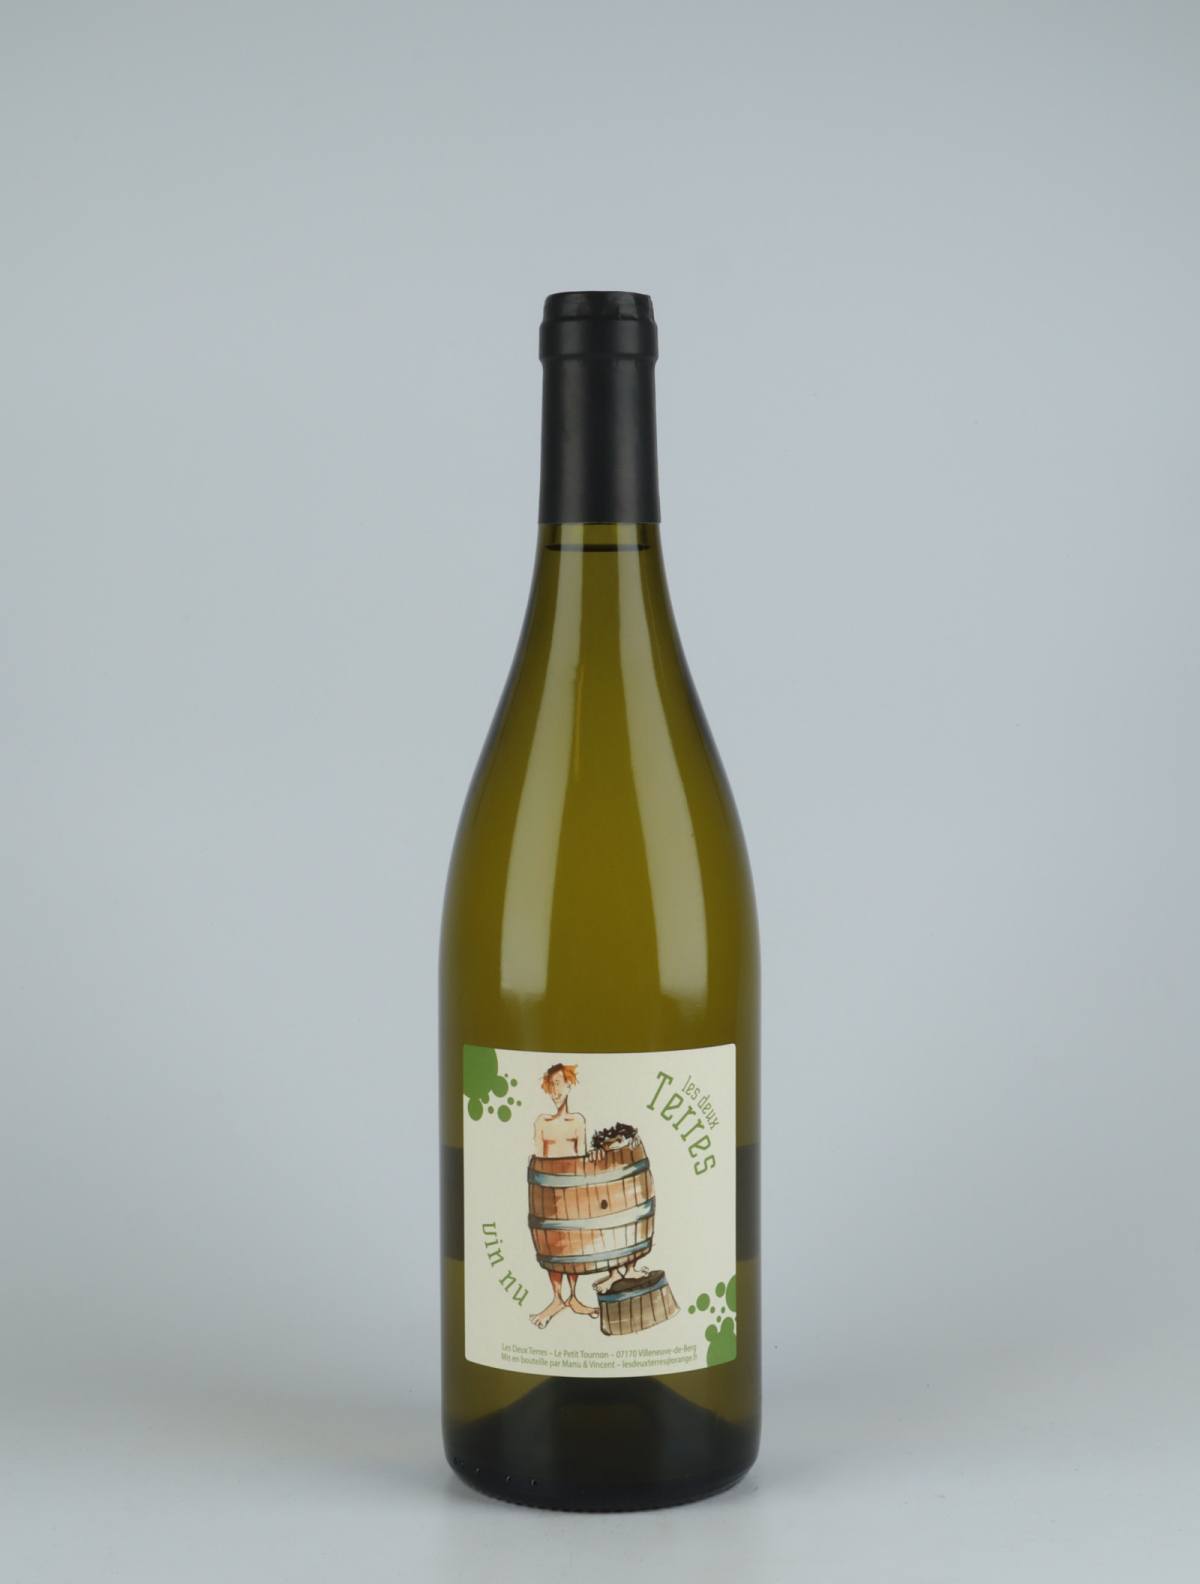 A bottle 2020 Vin Nu Blanc White wine from Les Deux Terres, Ardèche in France